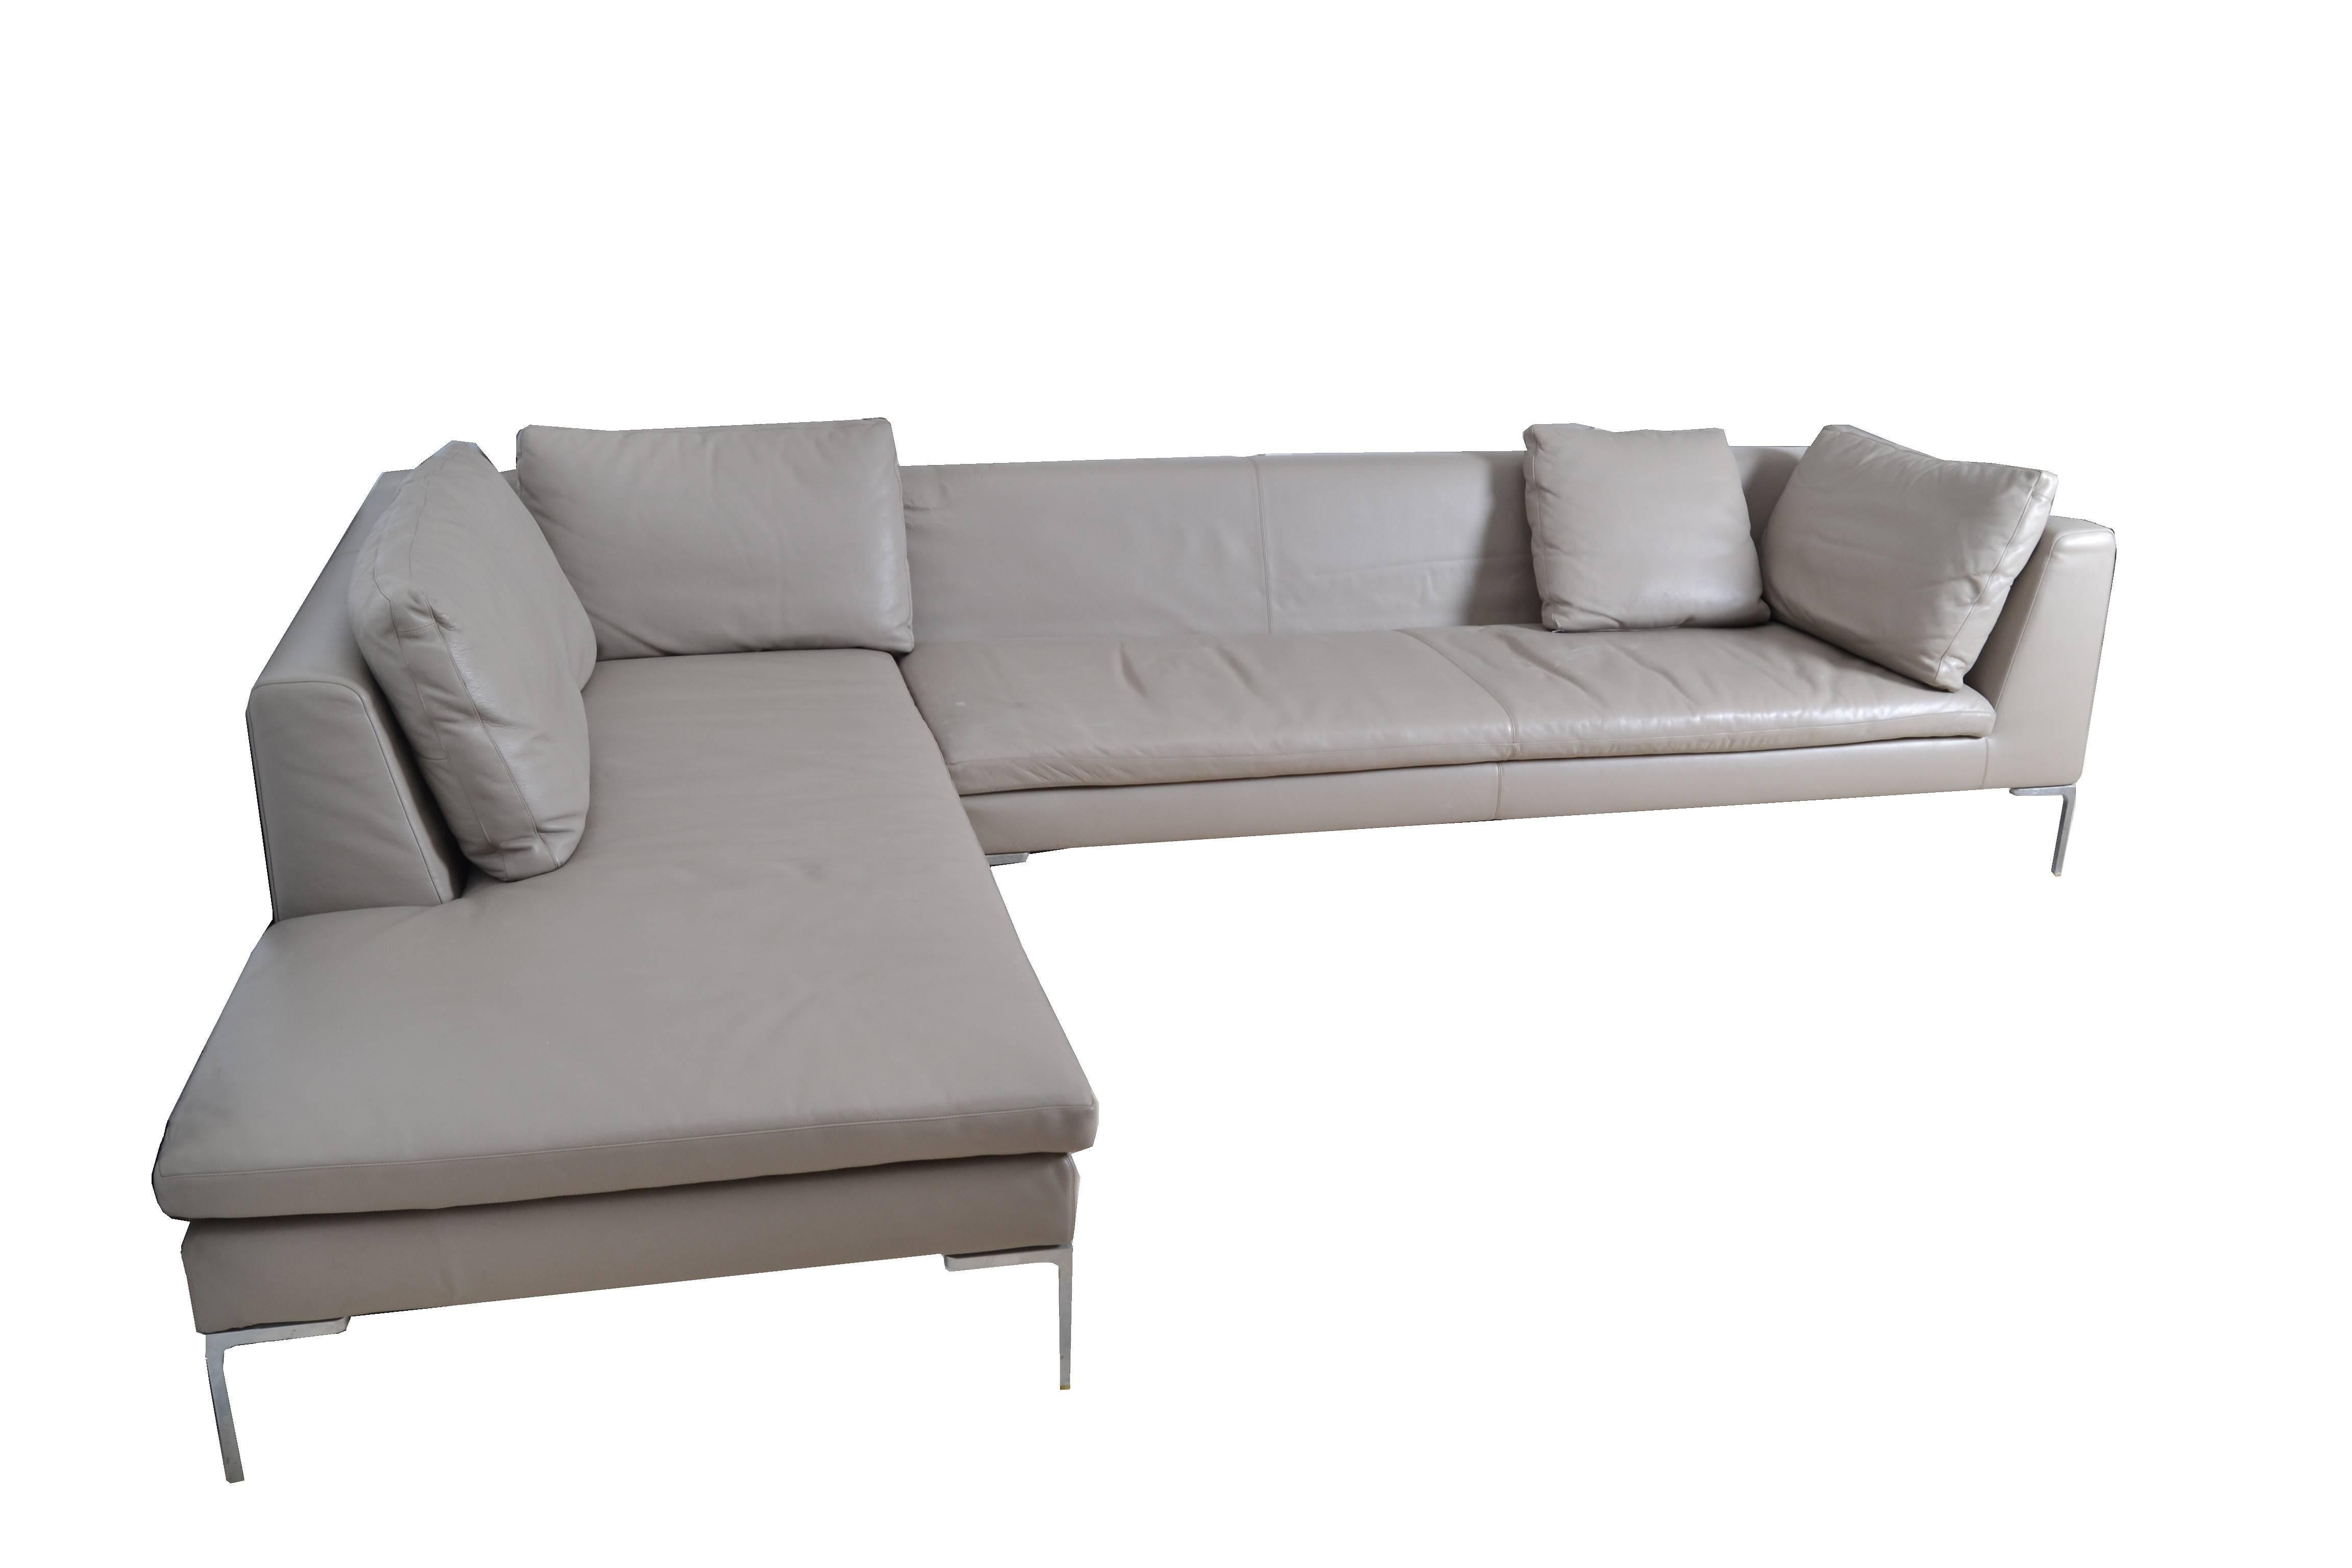 Original B&B Italia leather sectional sofa from the Maxalto collection. Model: Lucrezia, grey. This sofa consists of two sections. One straight and one chaise. Sits on die-cast aluminum Frame.
Dimension smaller section:
Depth 37.5 inches, length